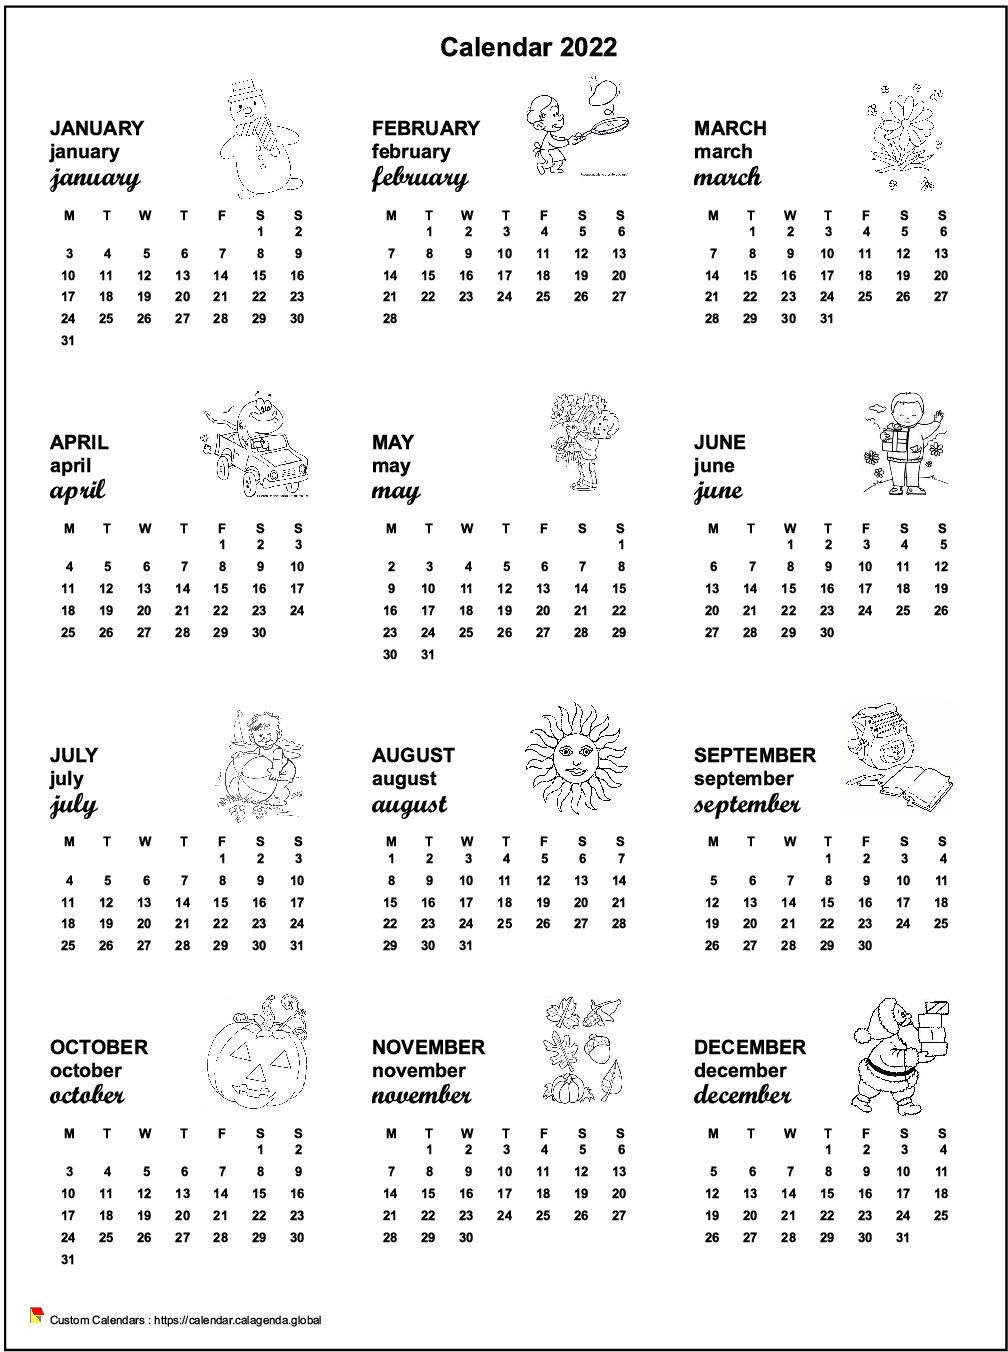 Calendar 2072 annual maternal and primary school